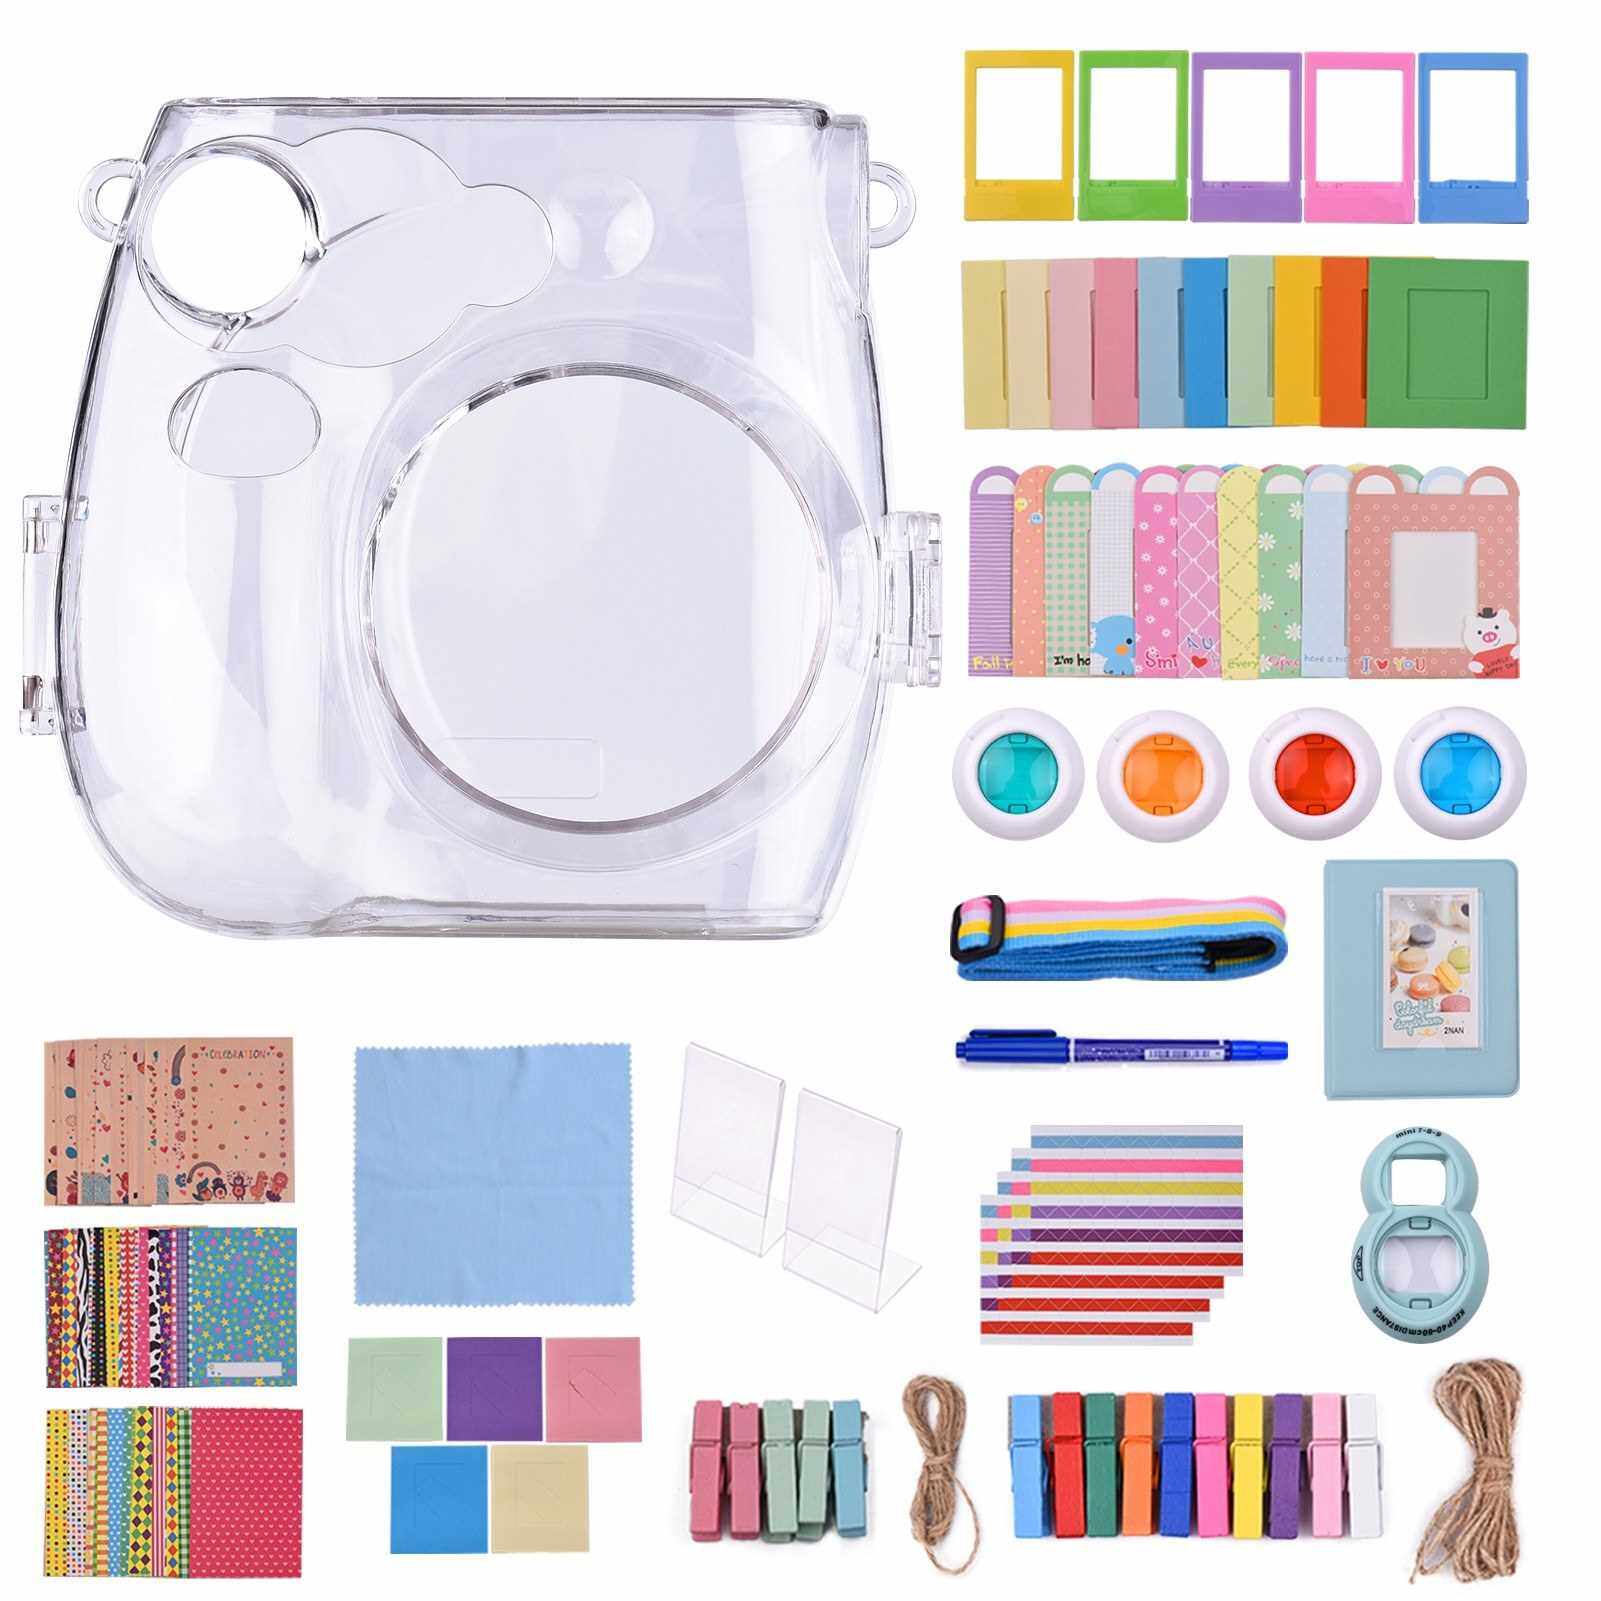 17-in-1 Instant Camera Accessories Kit Replacement for Fujifilm Instax Mini 7s/7c Instant Film Camera with Case/ Album/ Selfie Mirror/ Stickers/ Frames/ Lens Filter/ Lanyard and More (Standard)